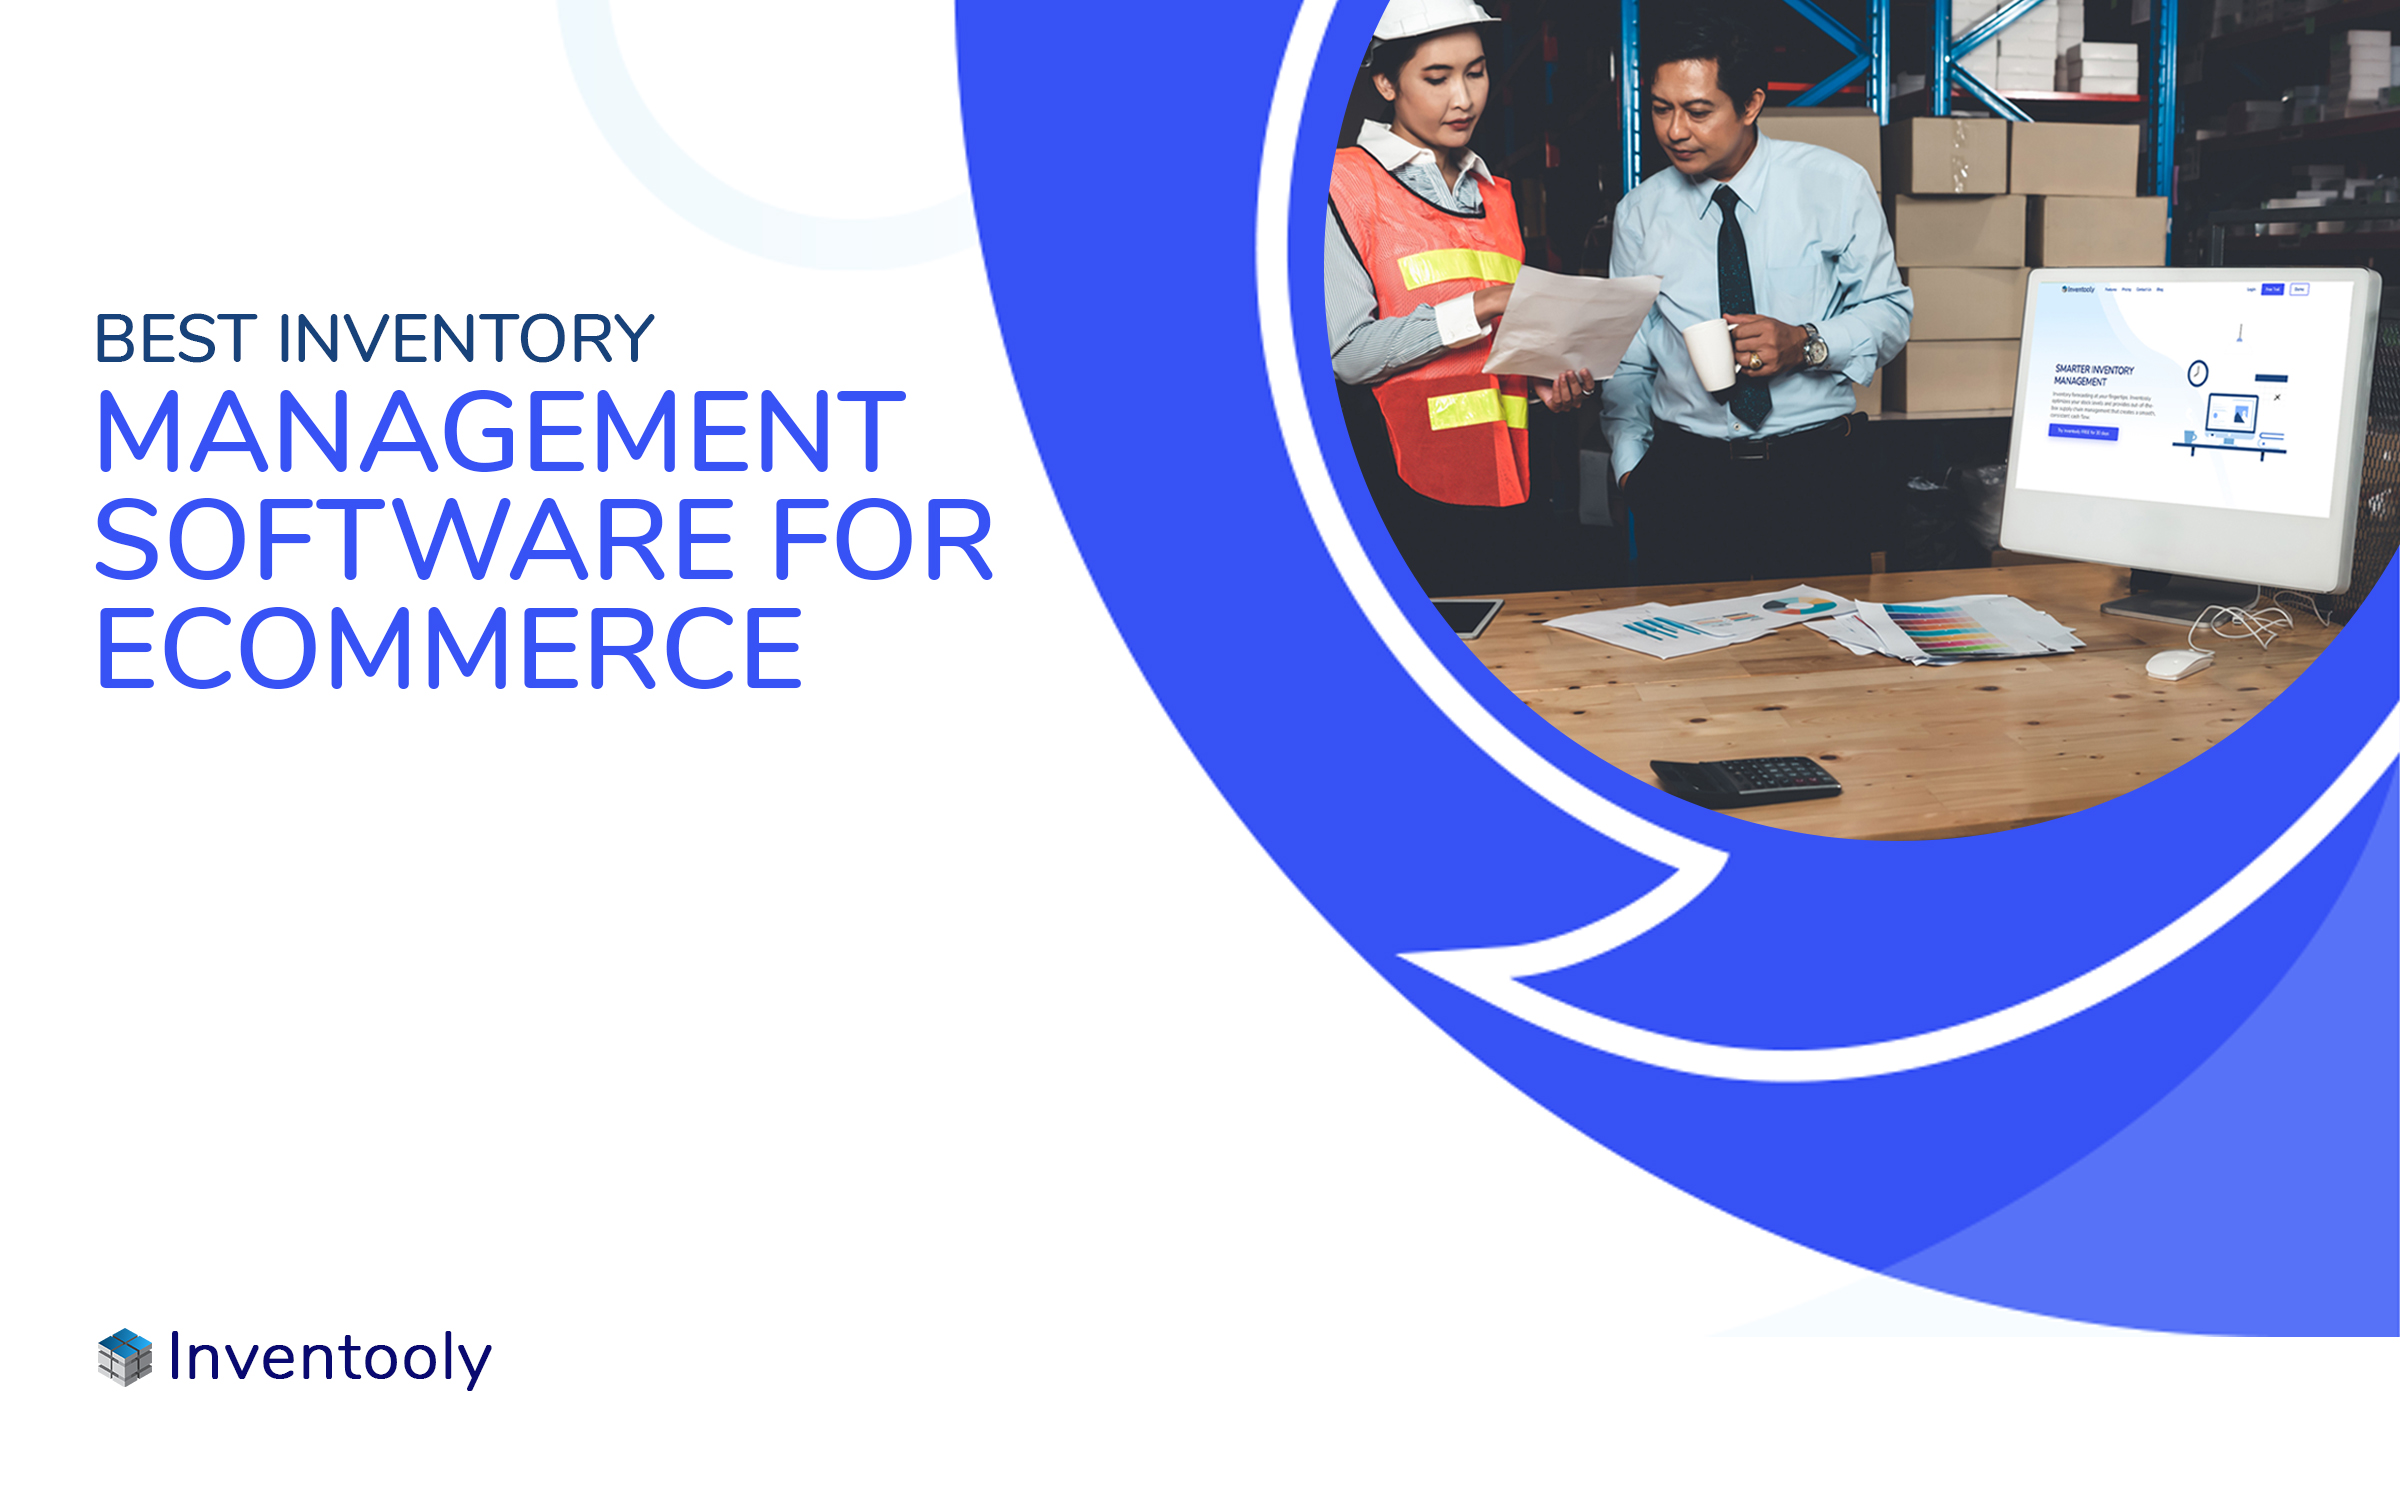 Best Inventory Management Software For Ecommerce